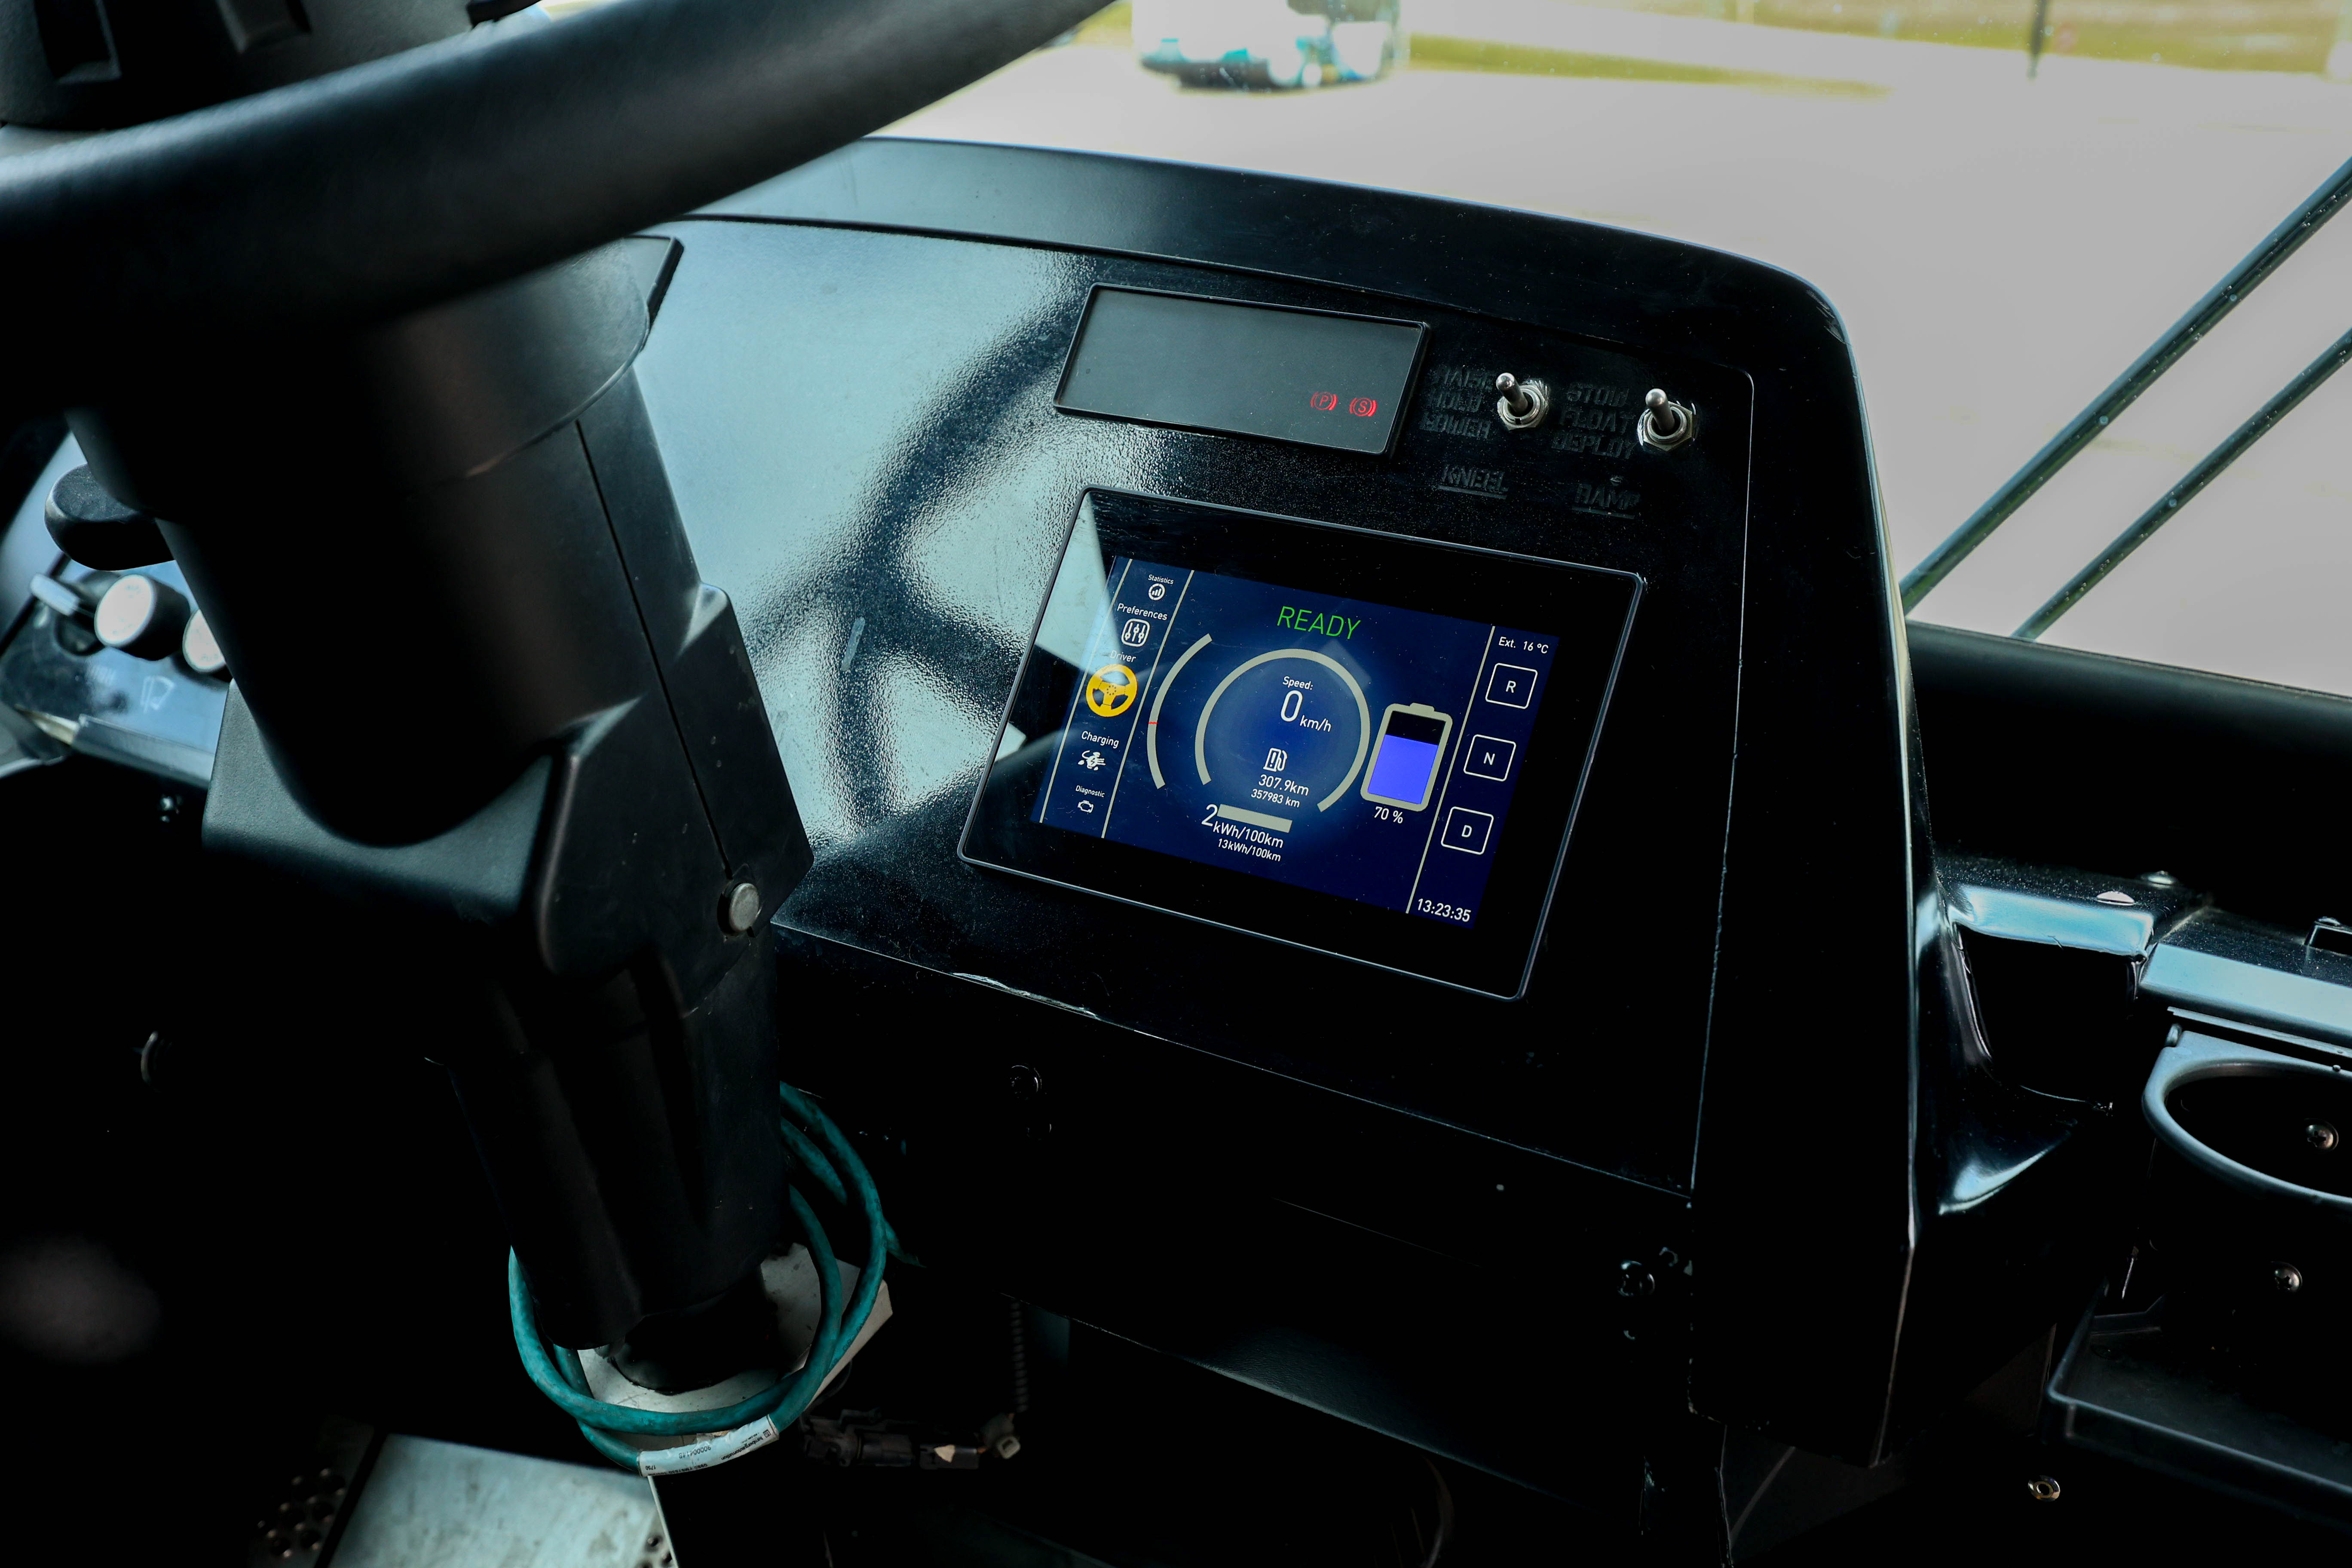 An e-bus clean power shift and touch screen inside of the bus